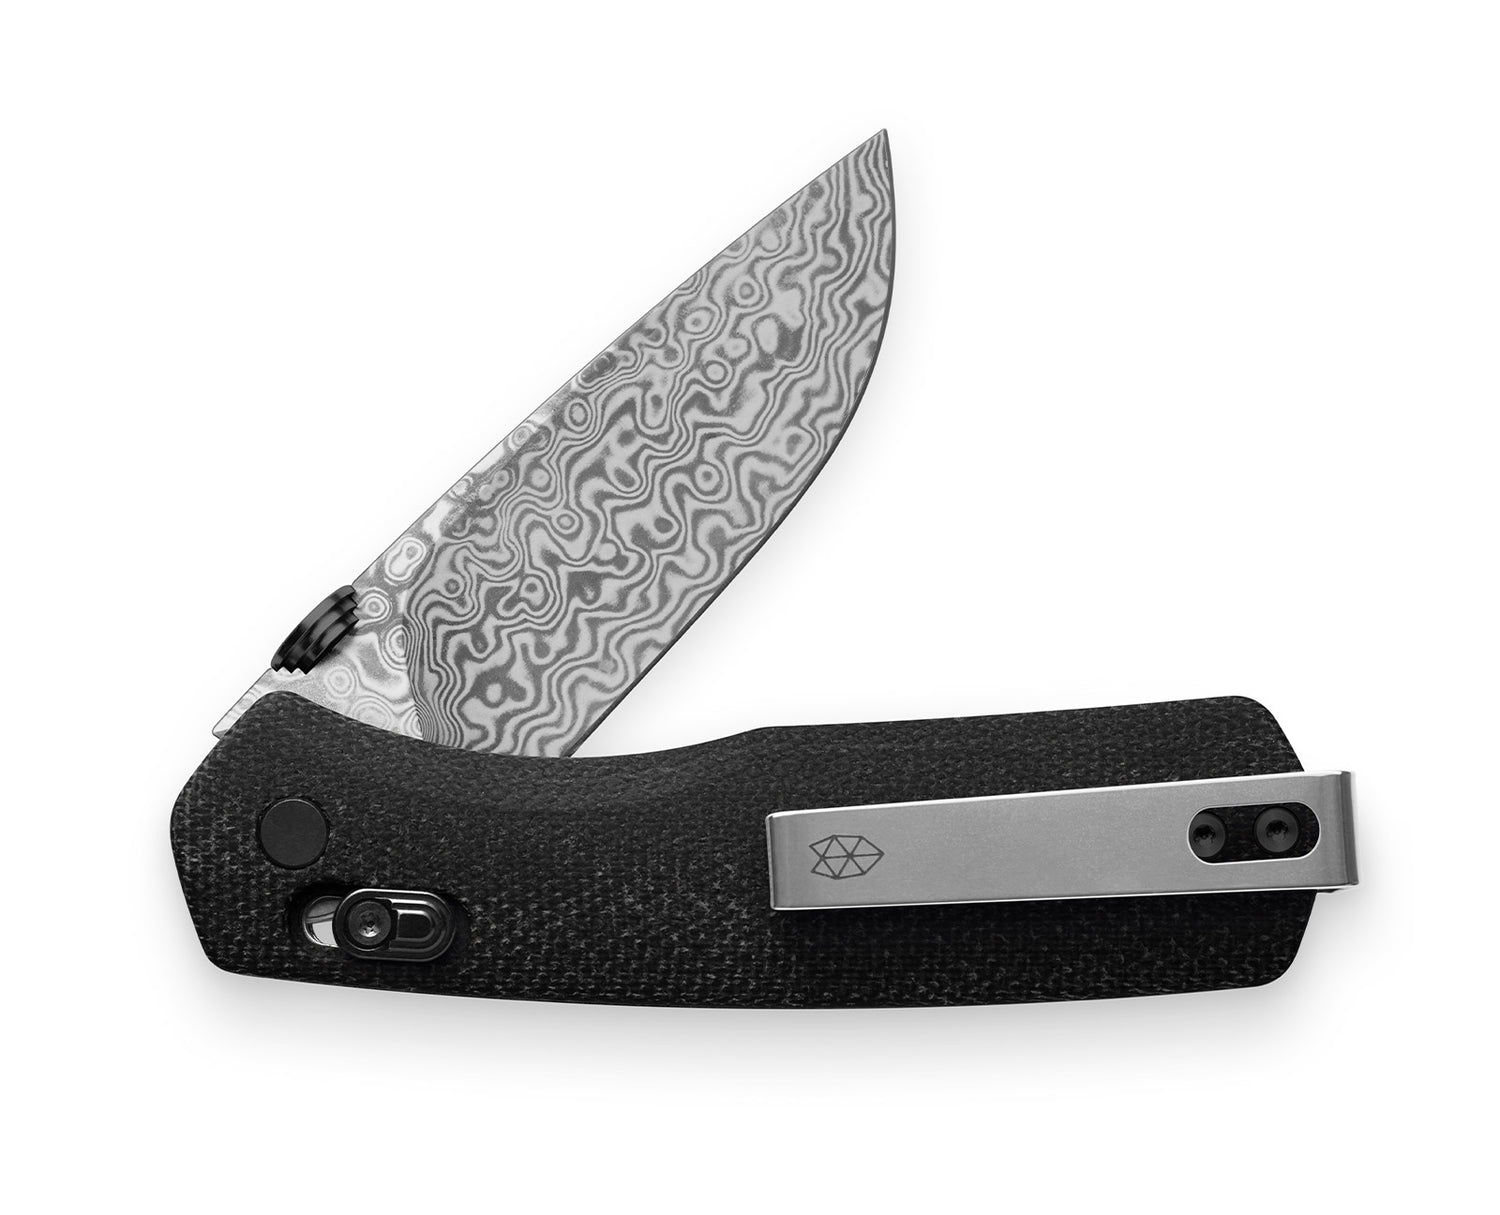 The Carter knife with black micarta handle and damascus blade.